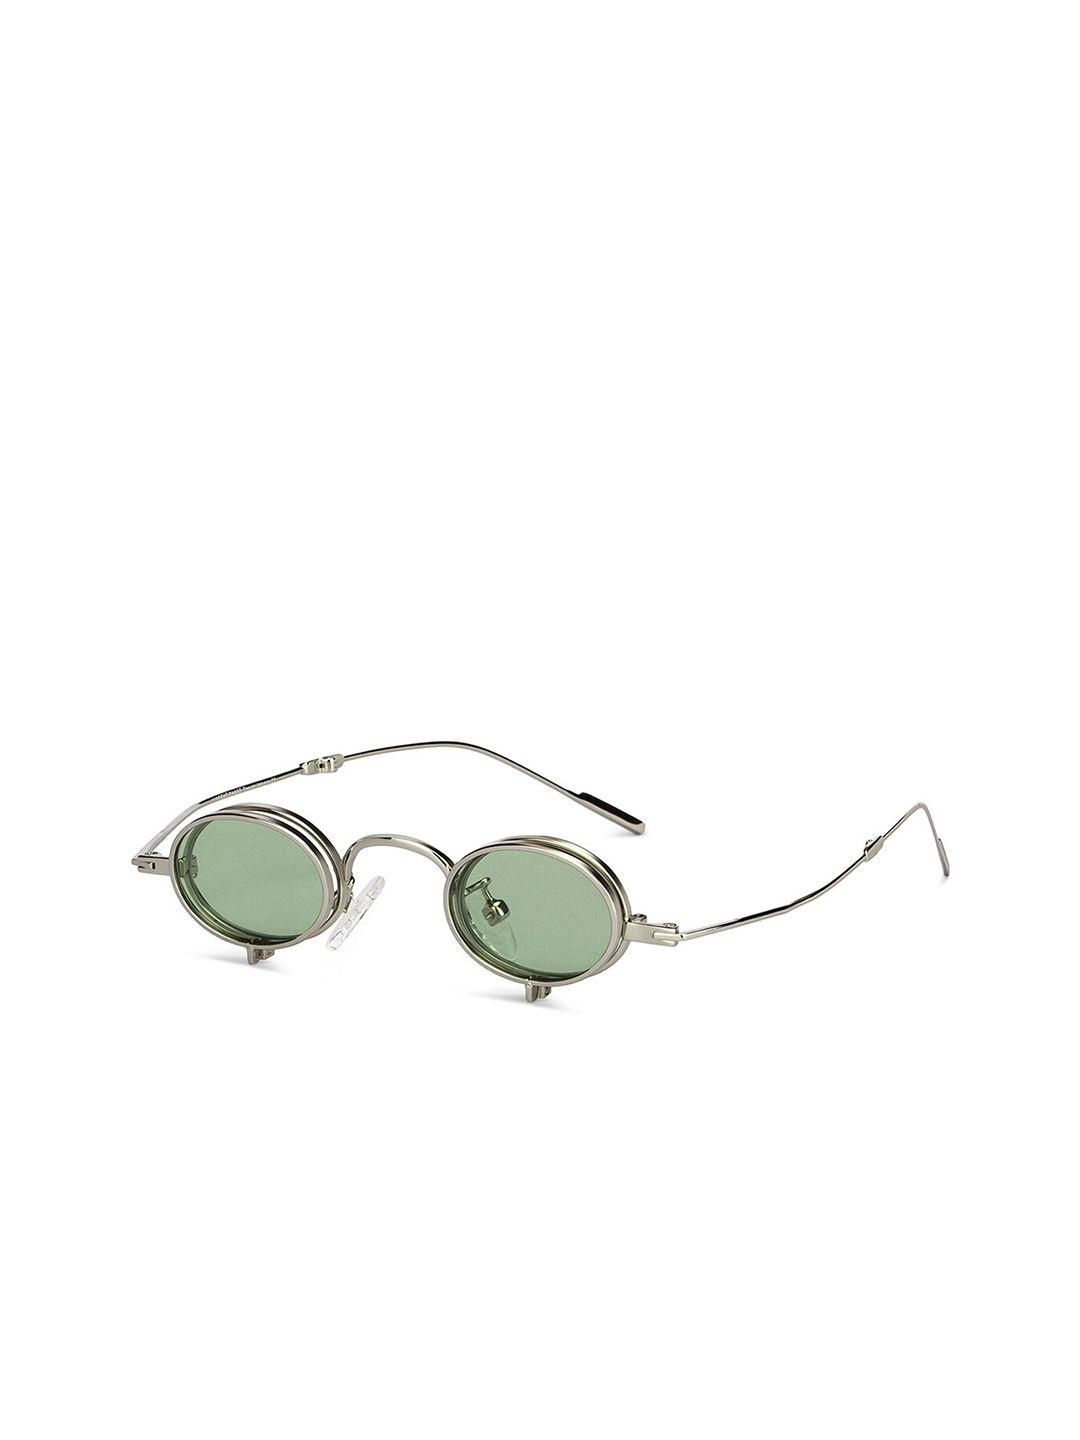 vincent chase unisex green lens & silver-toned round sunglasses - 151393